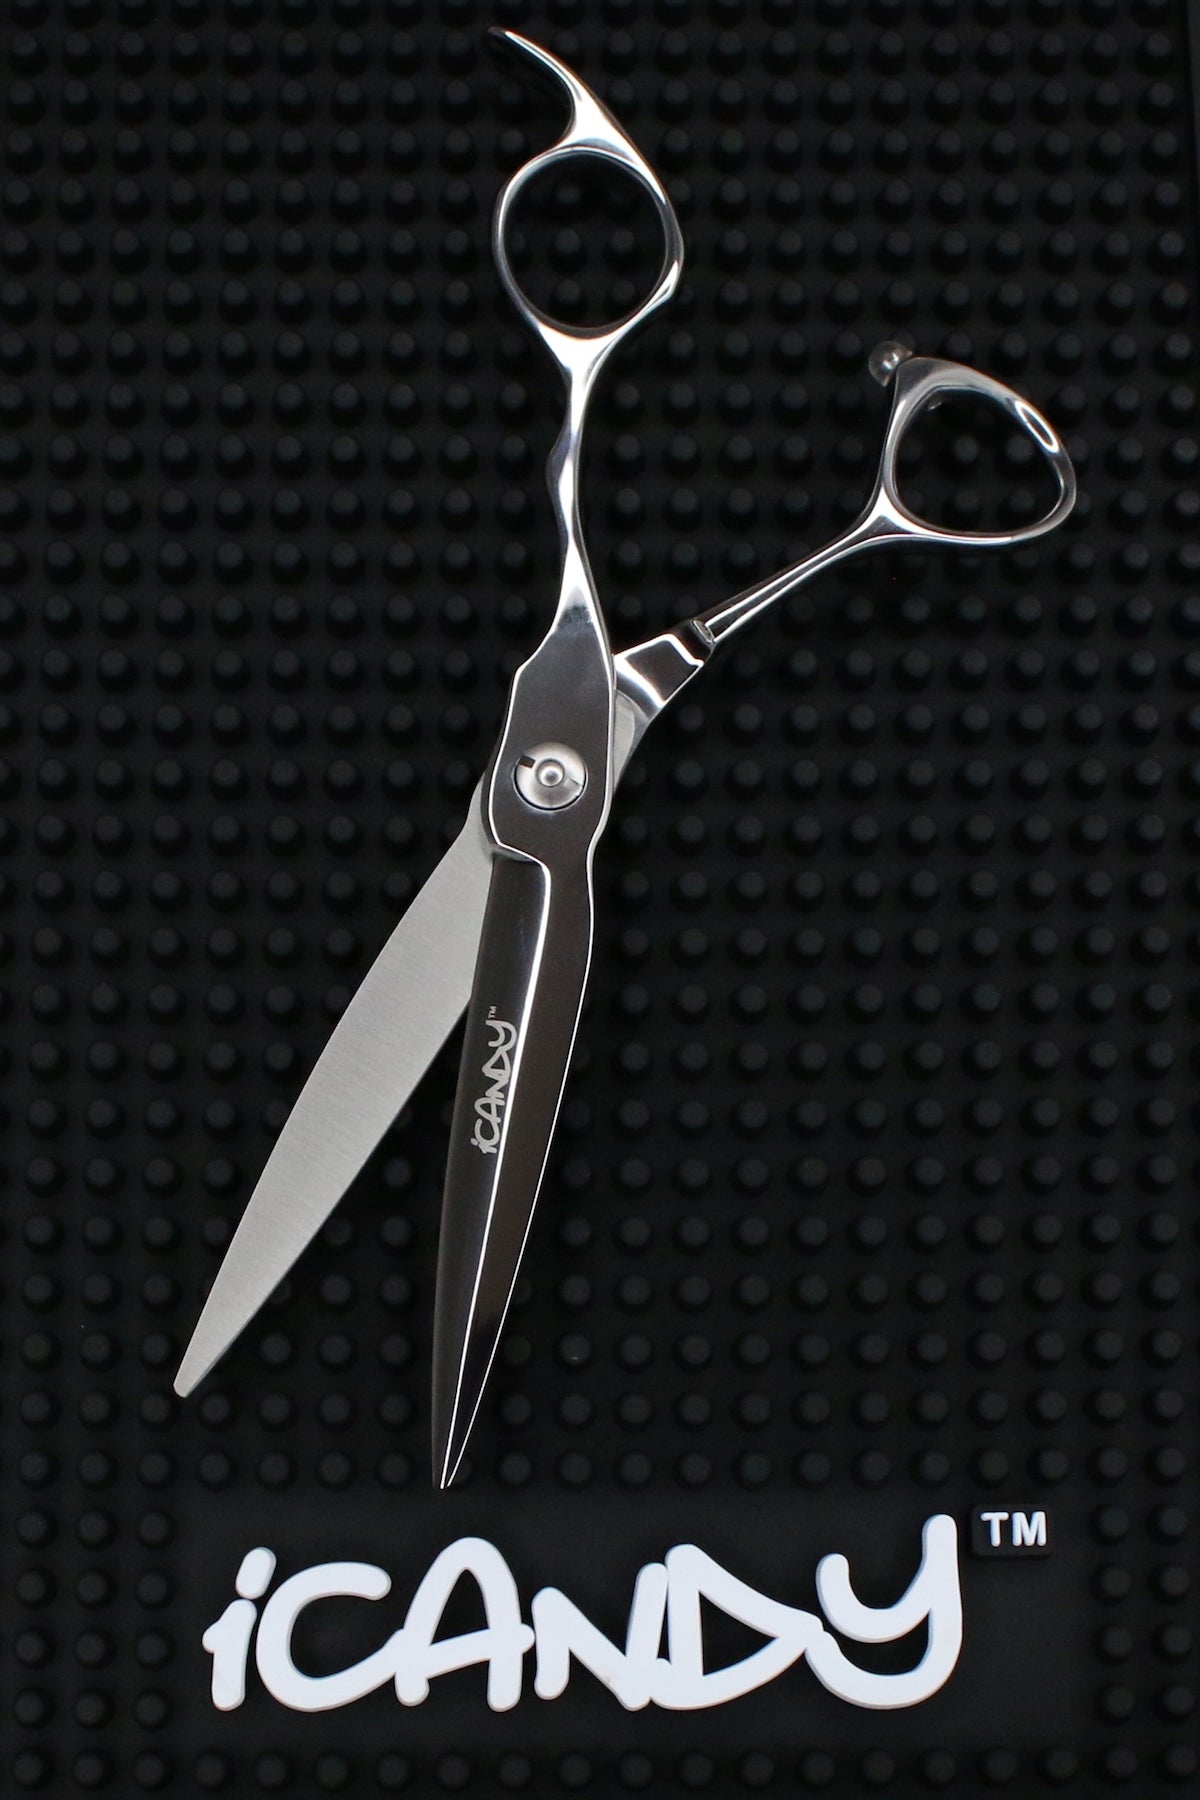 iCandy SLIDER VG10 Scissors (6.5 inch) Limited Edition! - iCandy Scissors